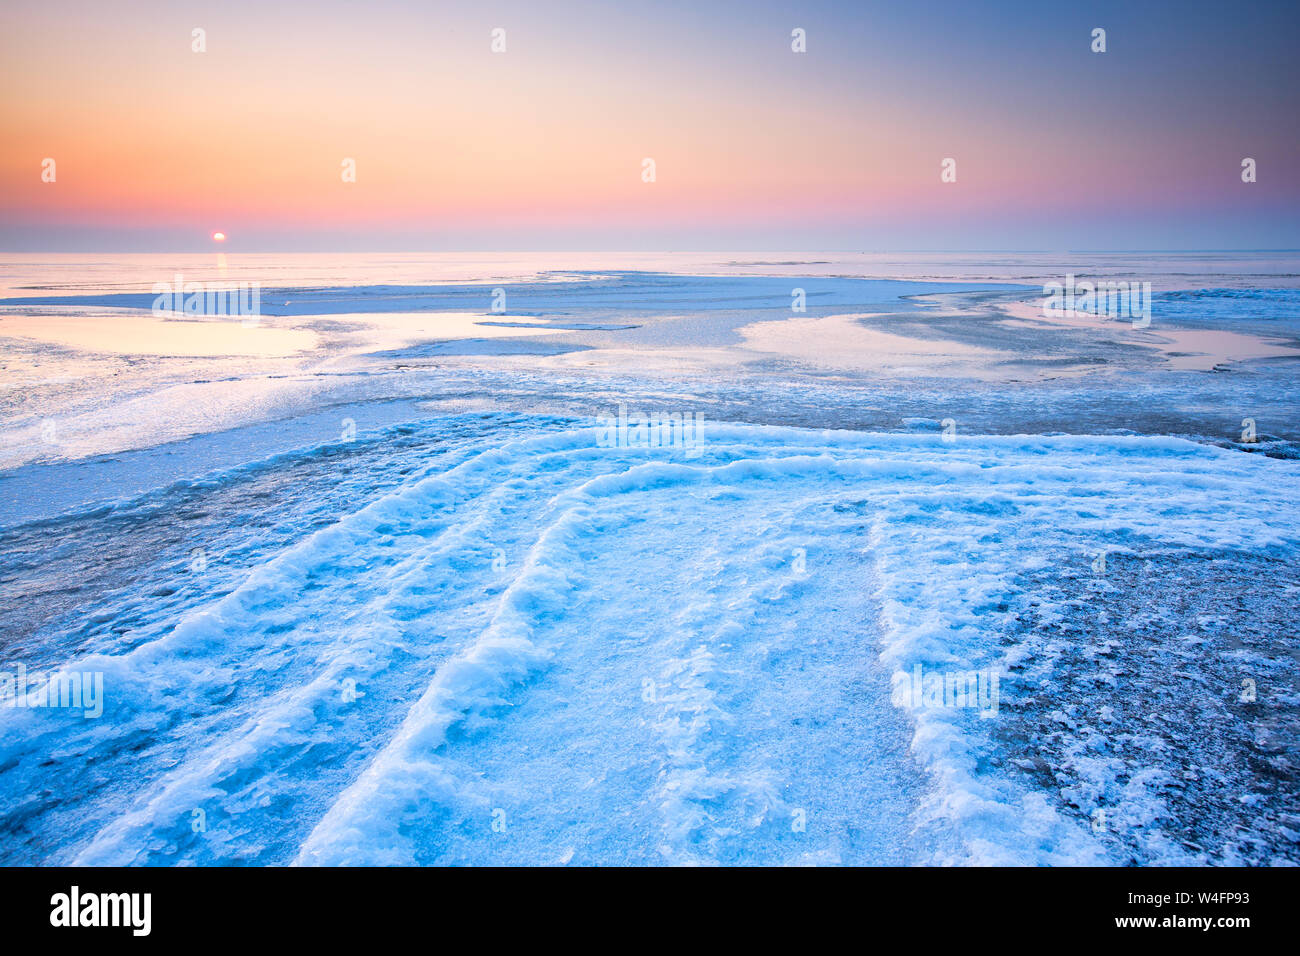 A polar landscape in winter with ice and snow and a colourful landscape with a blue and pink sky Stock Photo